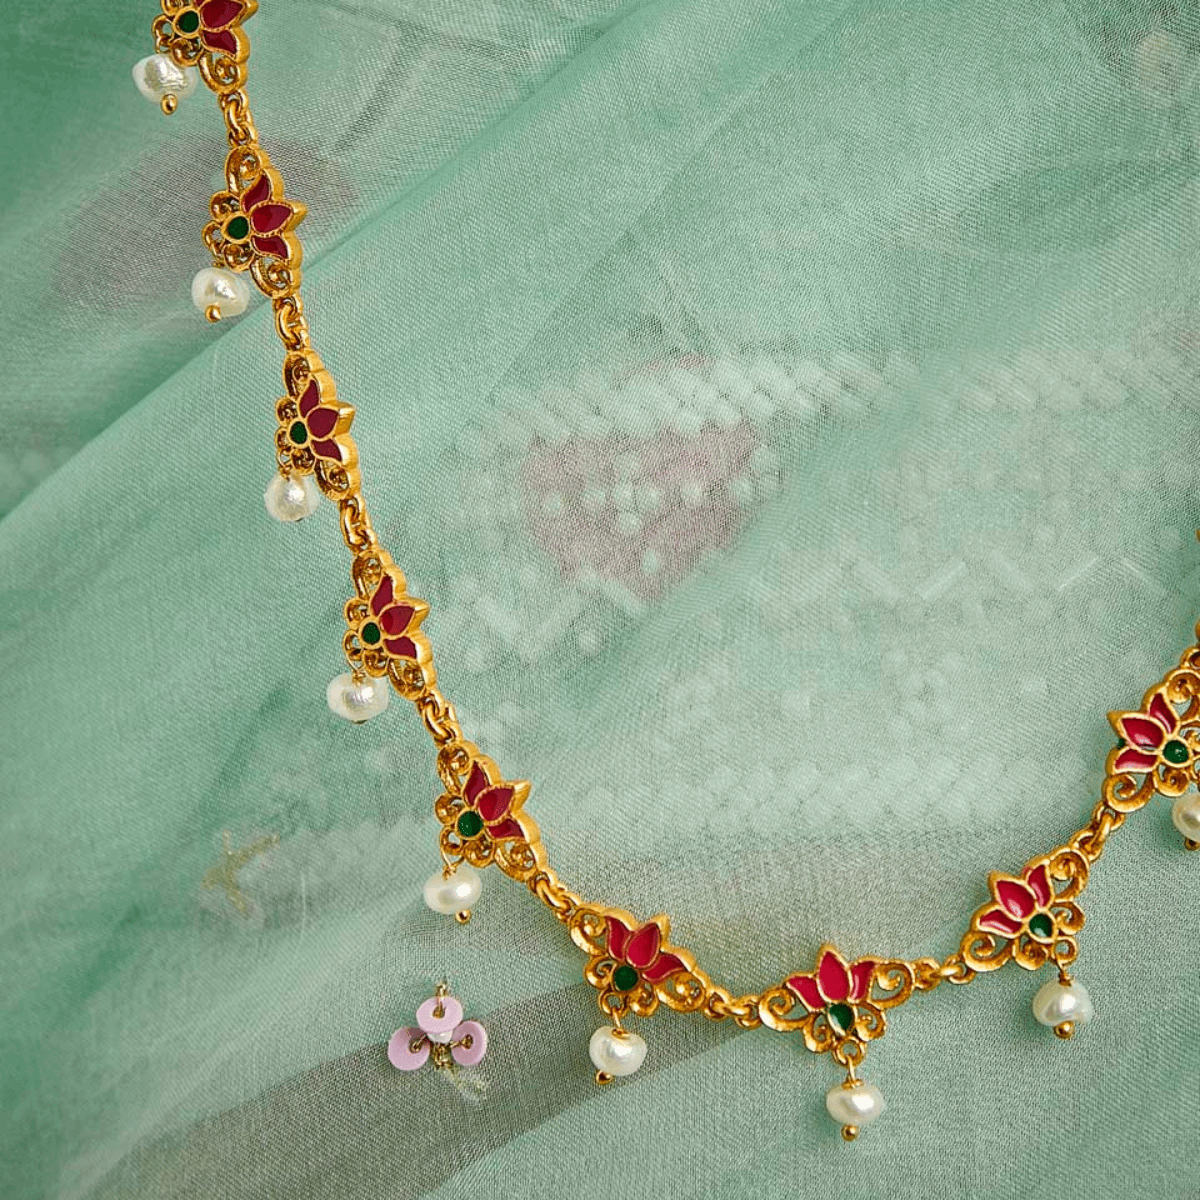 Threads of Lotus Long Necklace in Pink Enamel